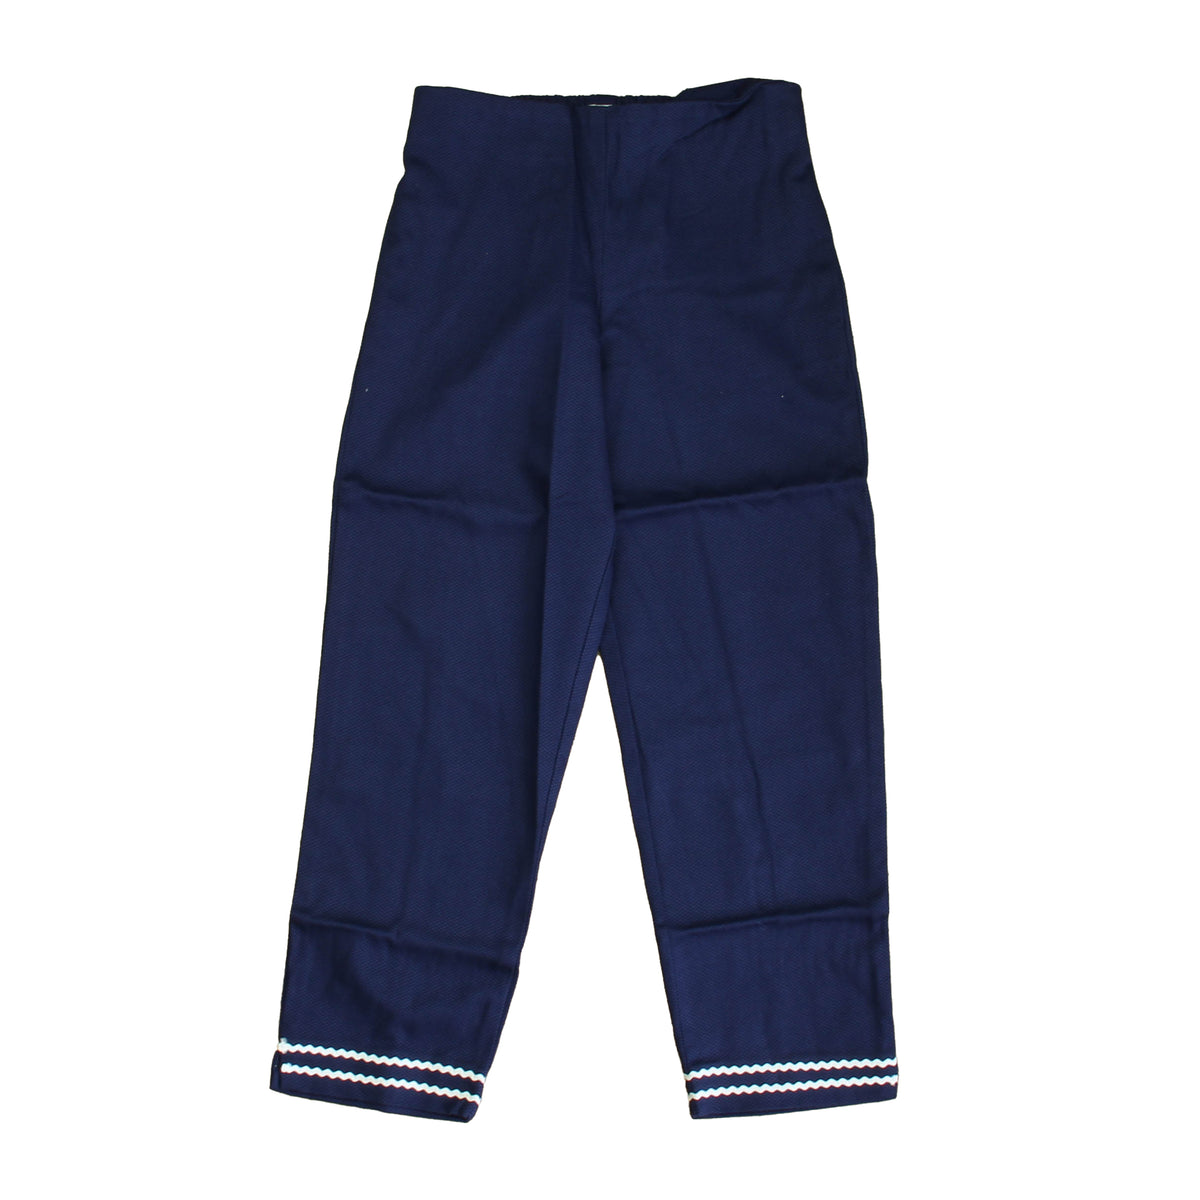 New with Tags: Navy Blue Pants size: 6-14 Years -- FINAL SALE